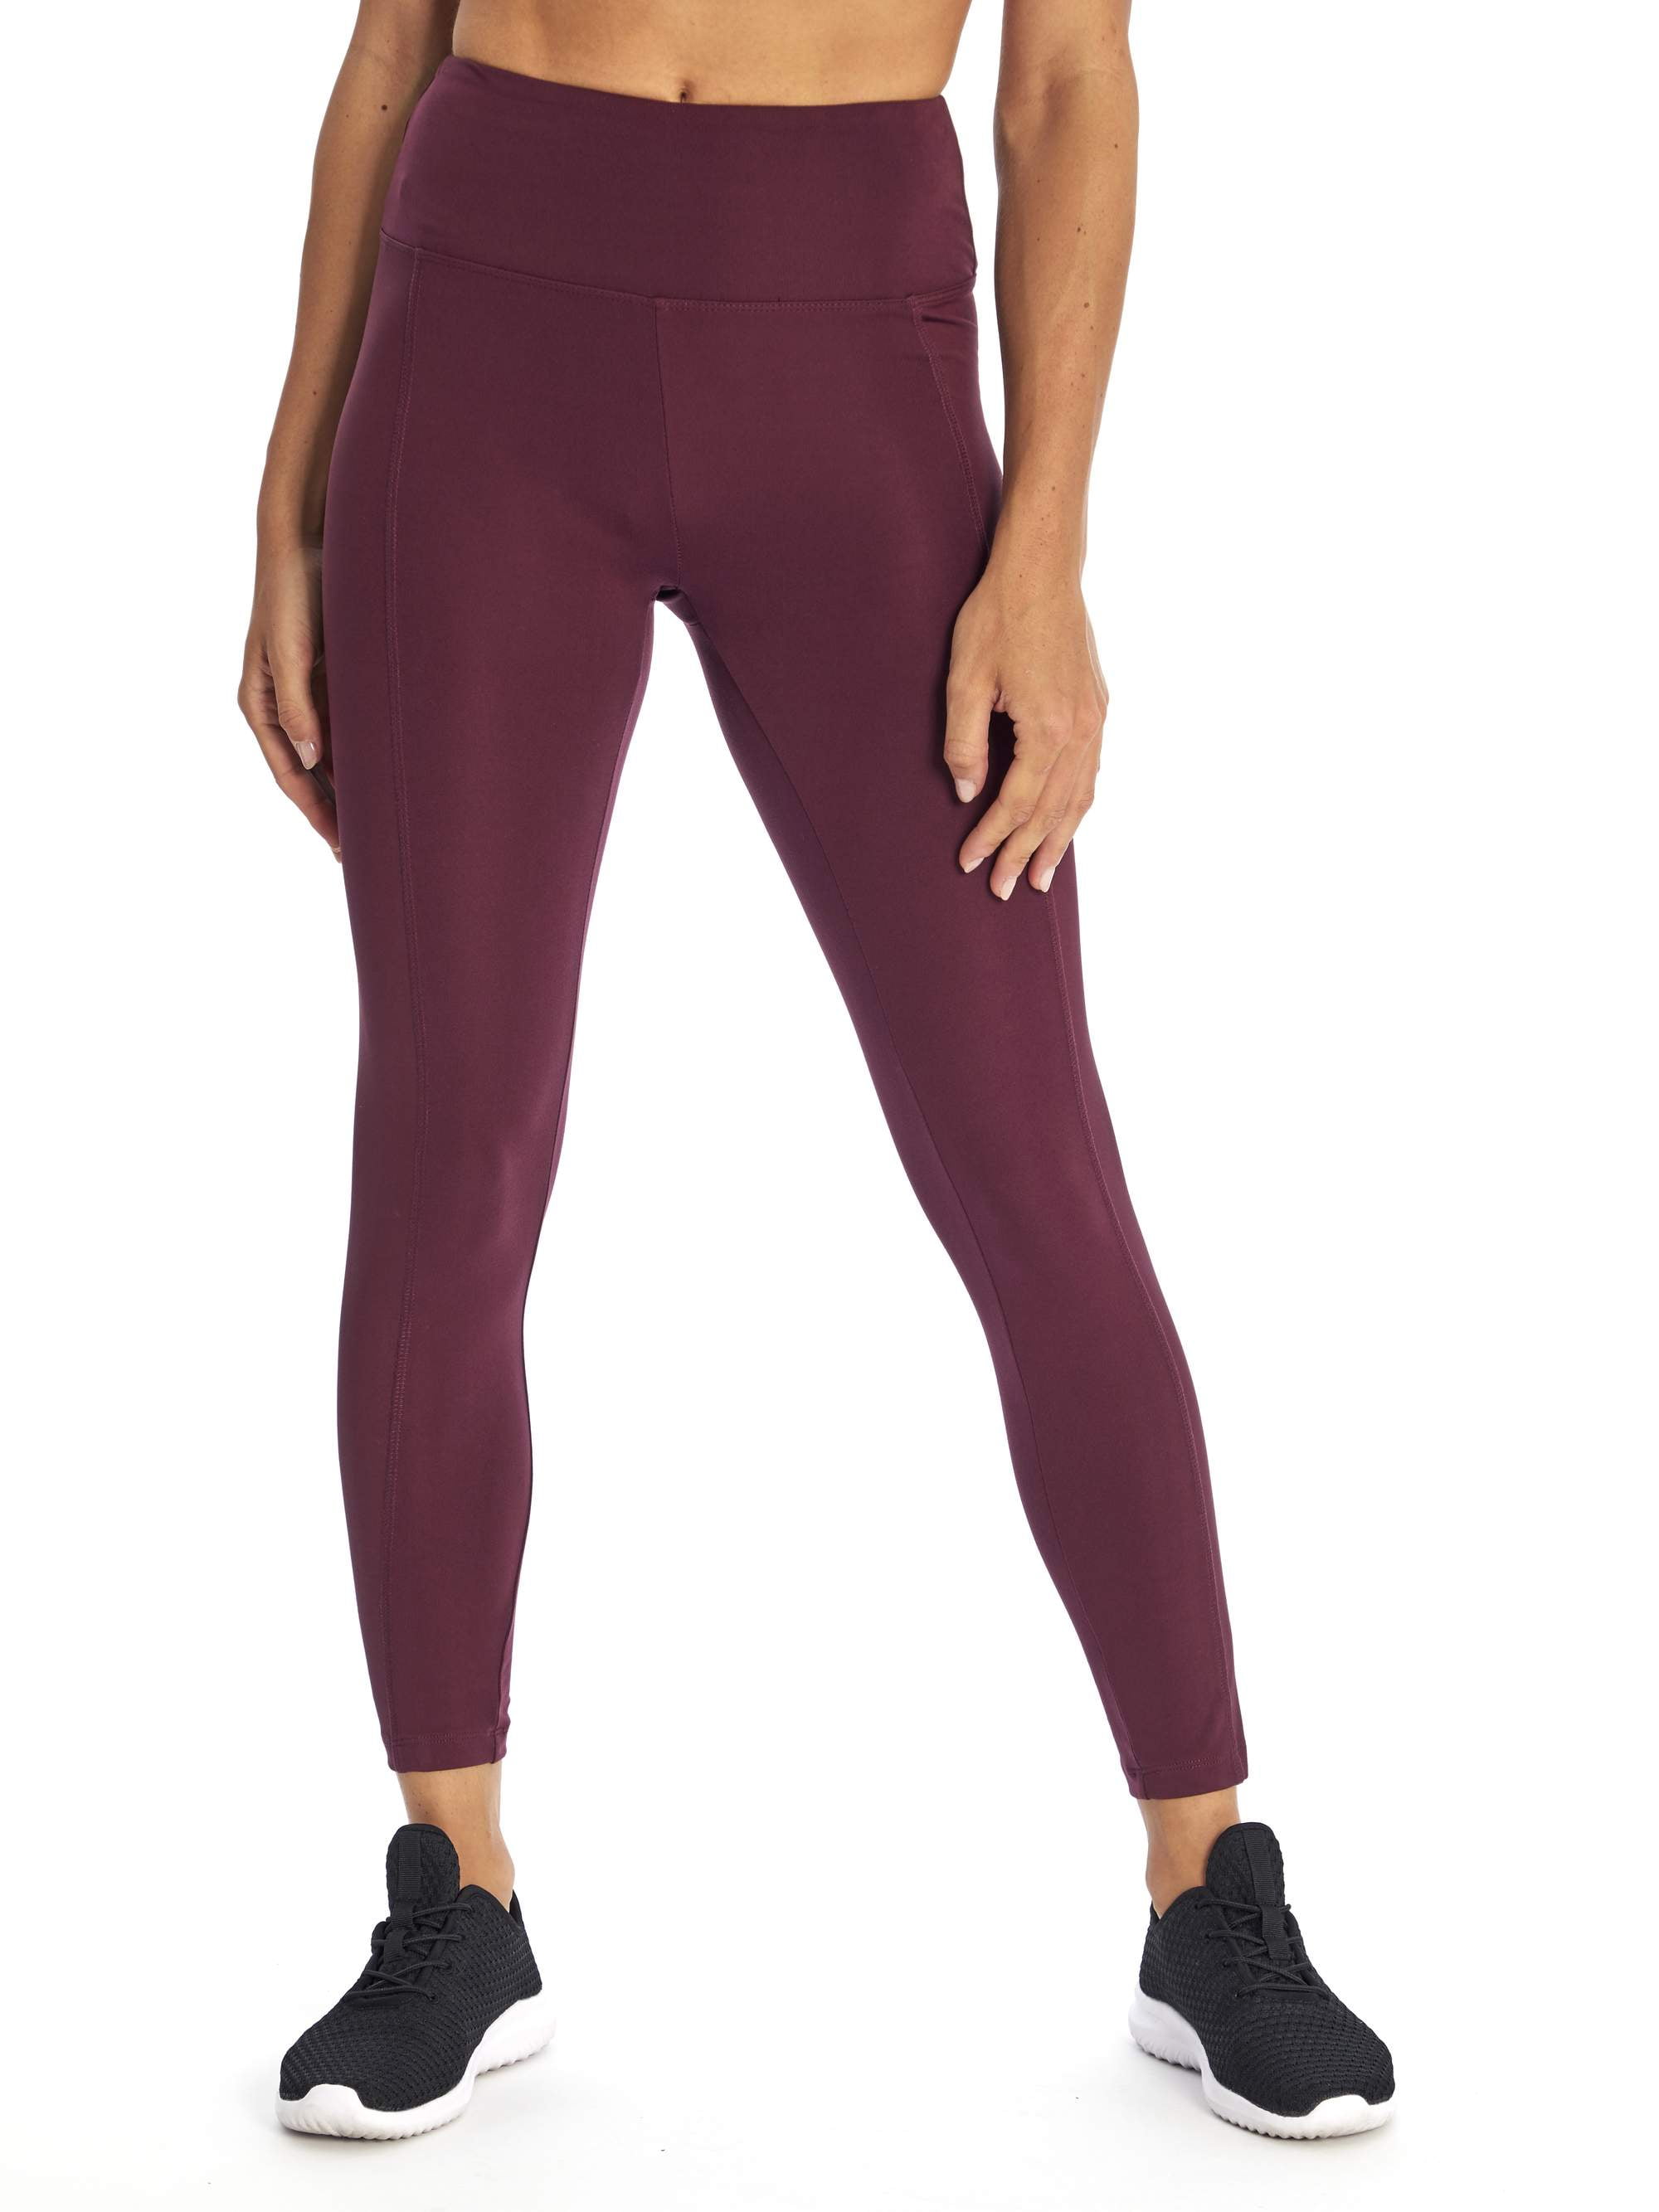  Bally Total Fitness Kylie High Rise Ankle Legging